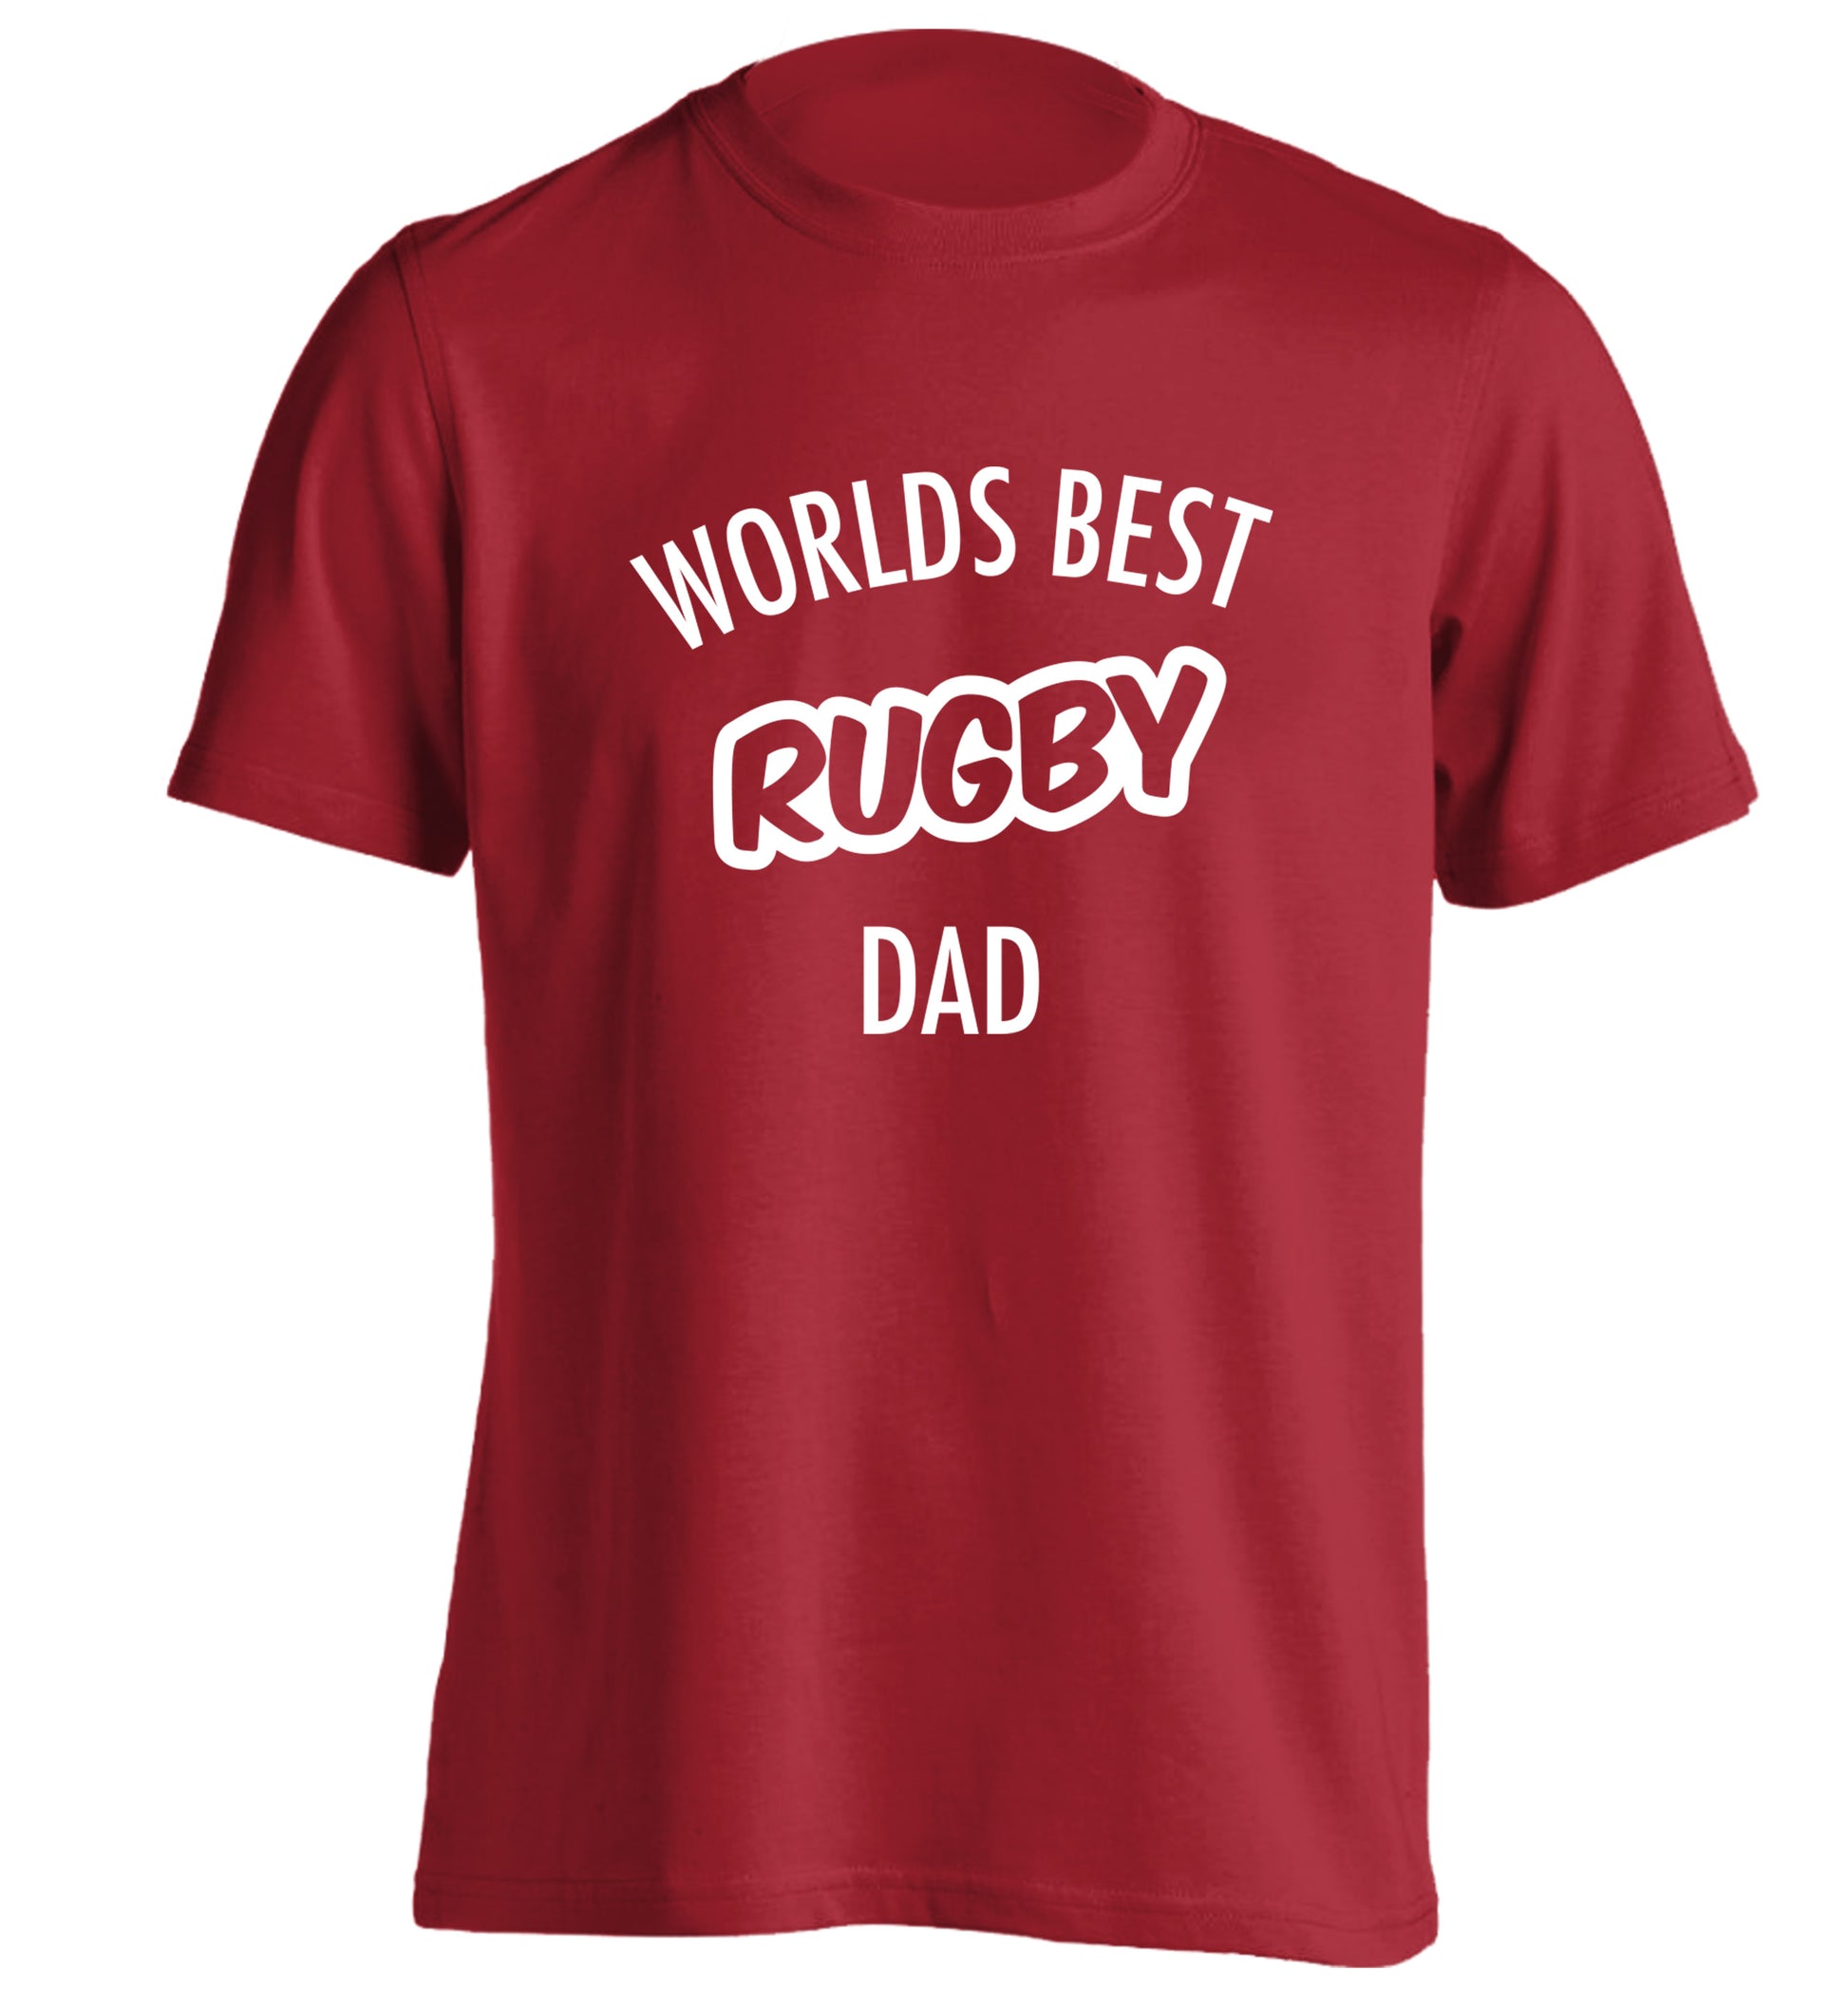 Worlds best rugby dad adults unisex red Tshirt 2XL